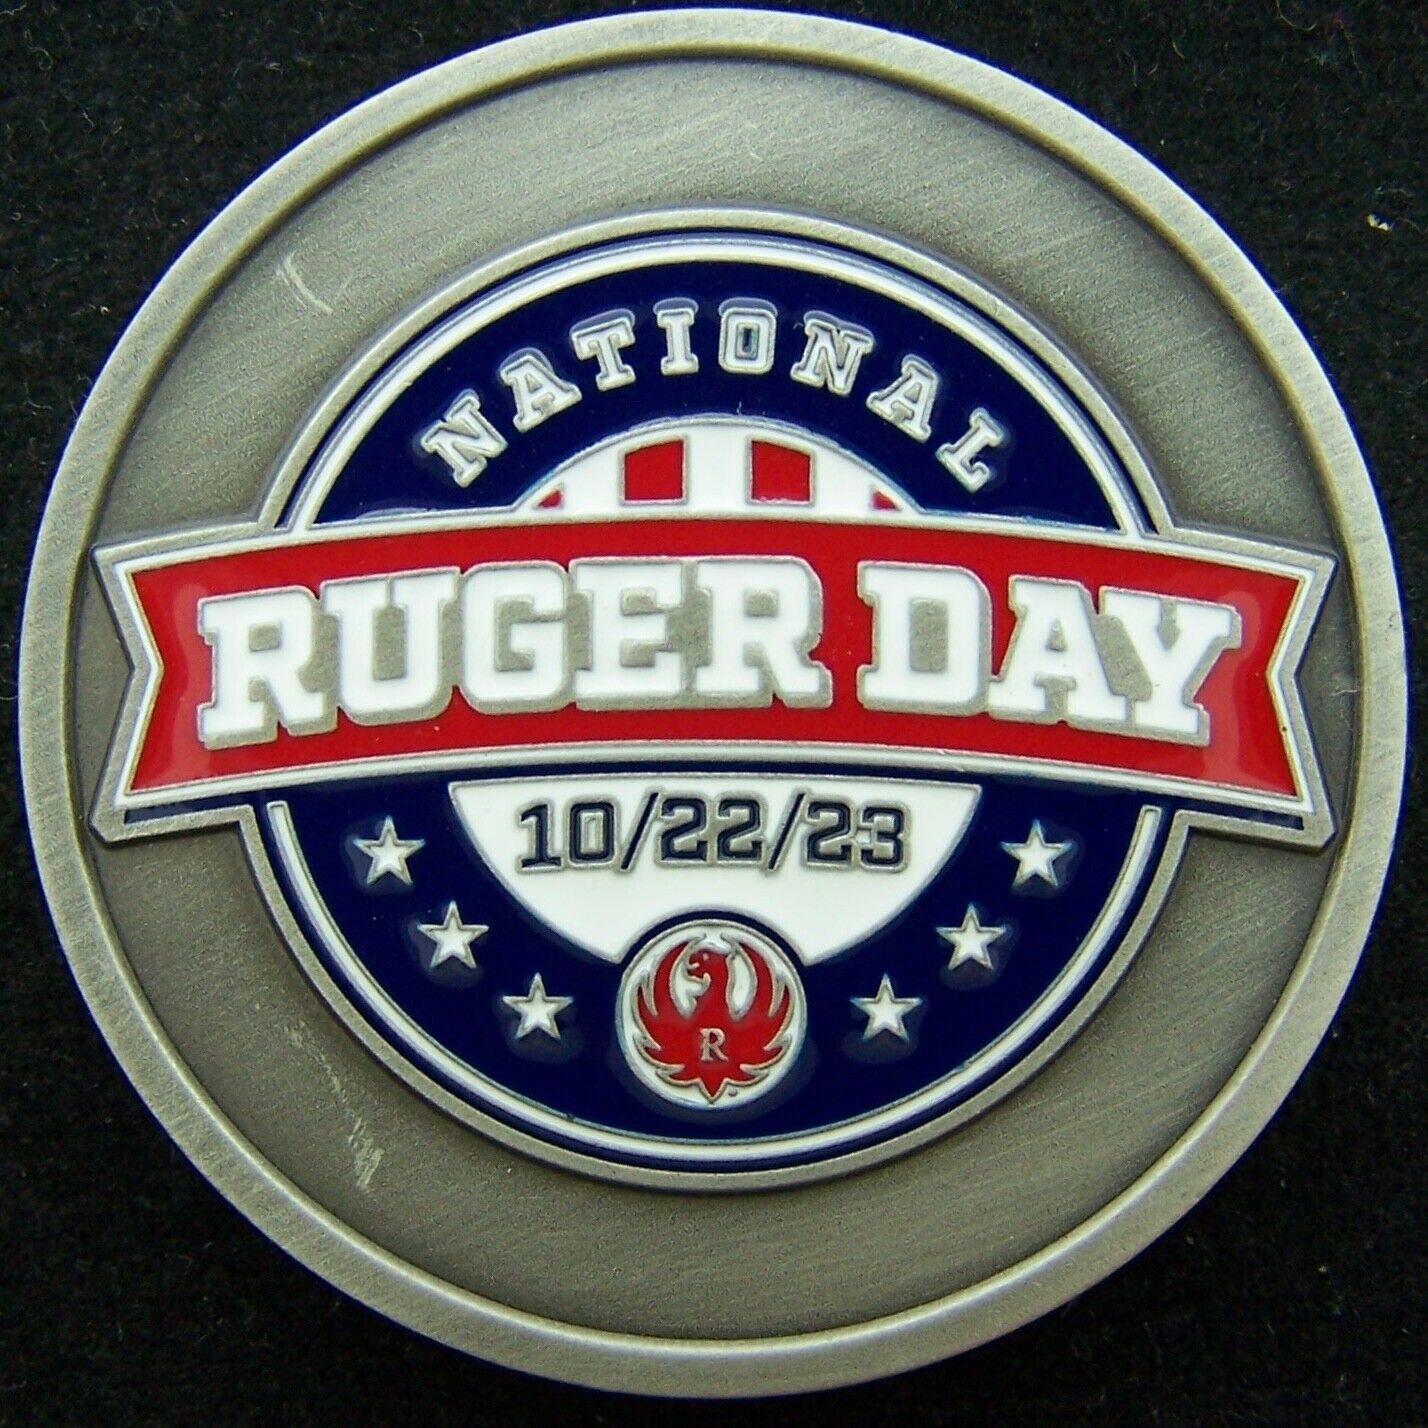 Ruger Firearms National Ruger Day 10/22/2023 Challenge Coin